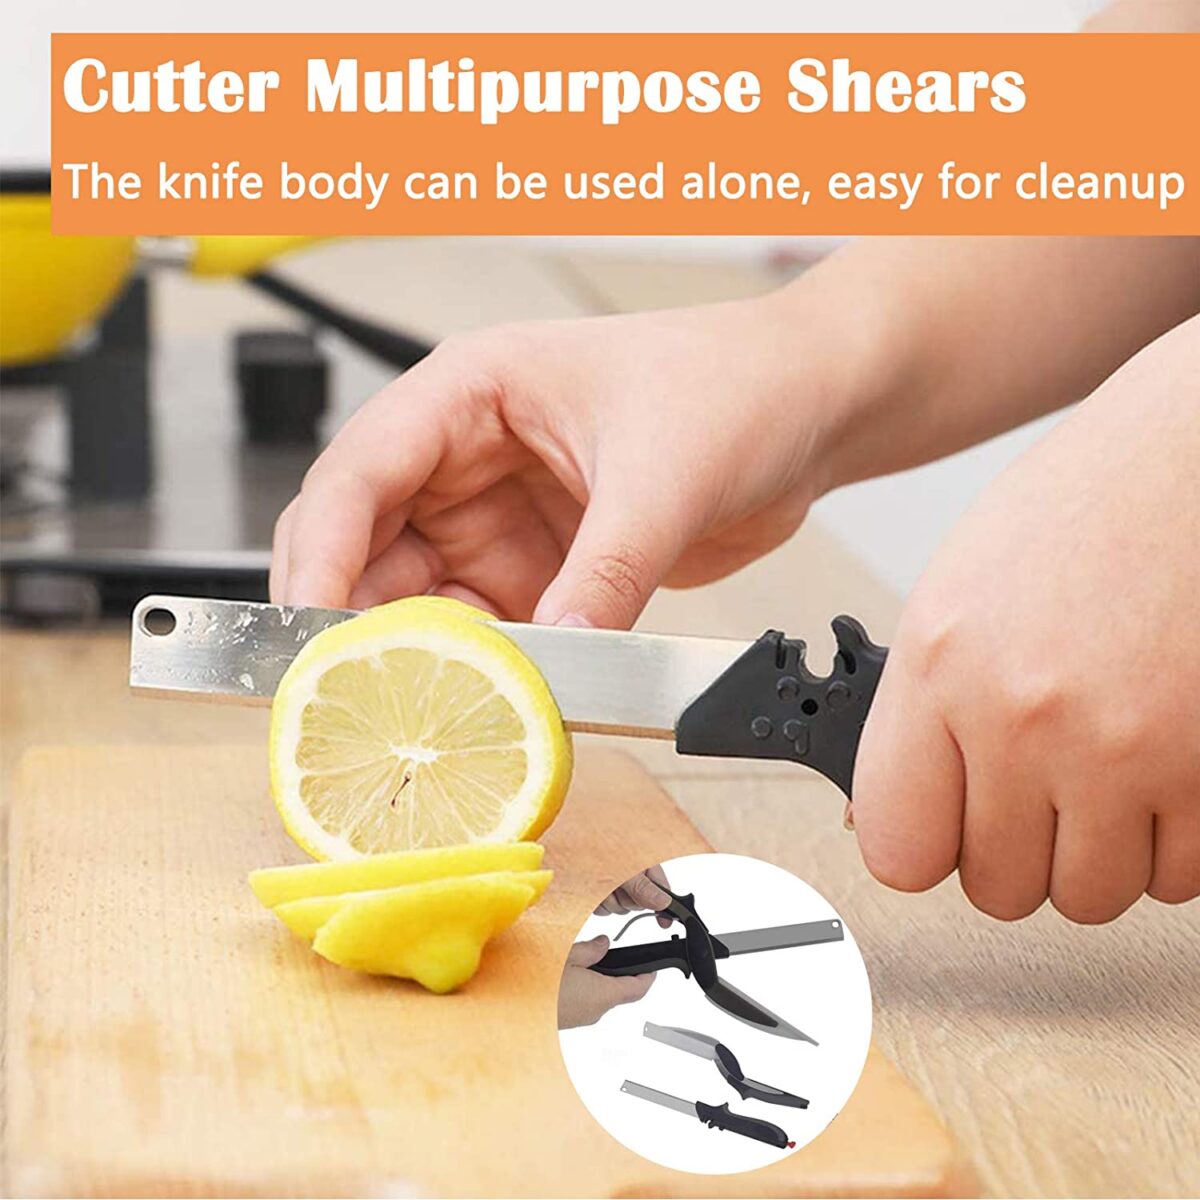 2 In 1 Kitchen Knife & Cutting Board - Stainless Steel Clever Food Cutter Scissor Smart Knife with Built-in Cutting Board for Cutting, Chopping, Slicing